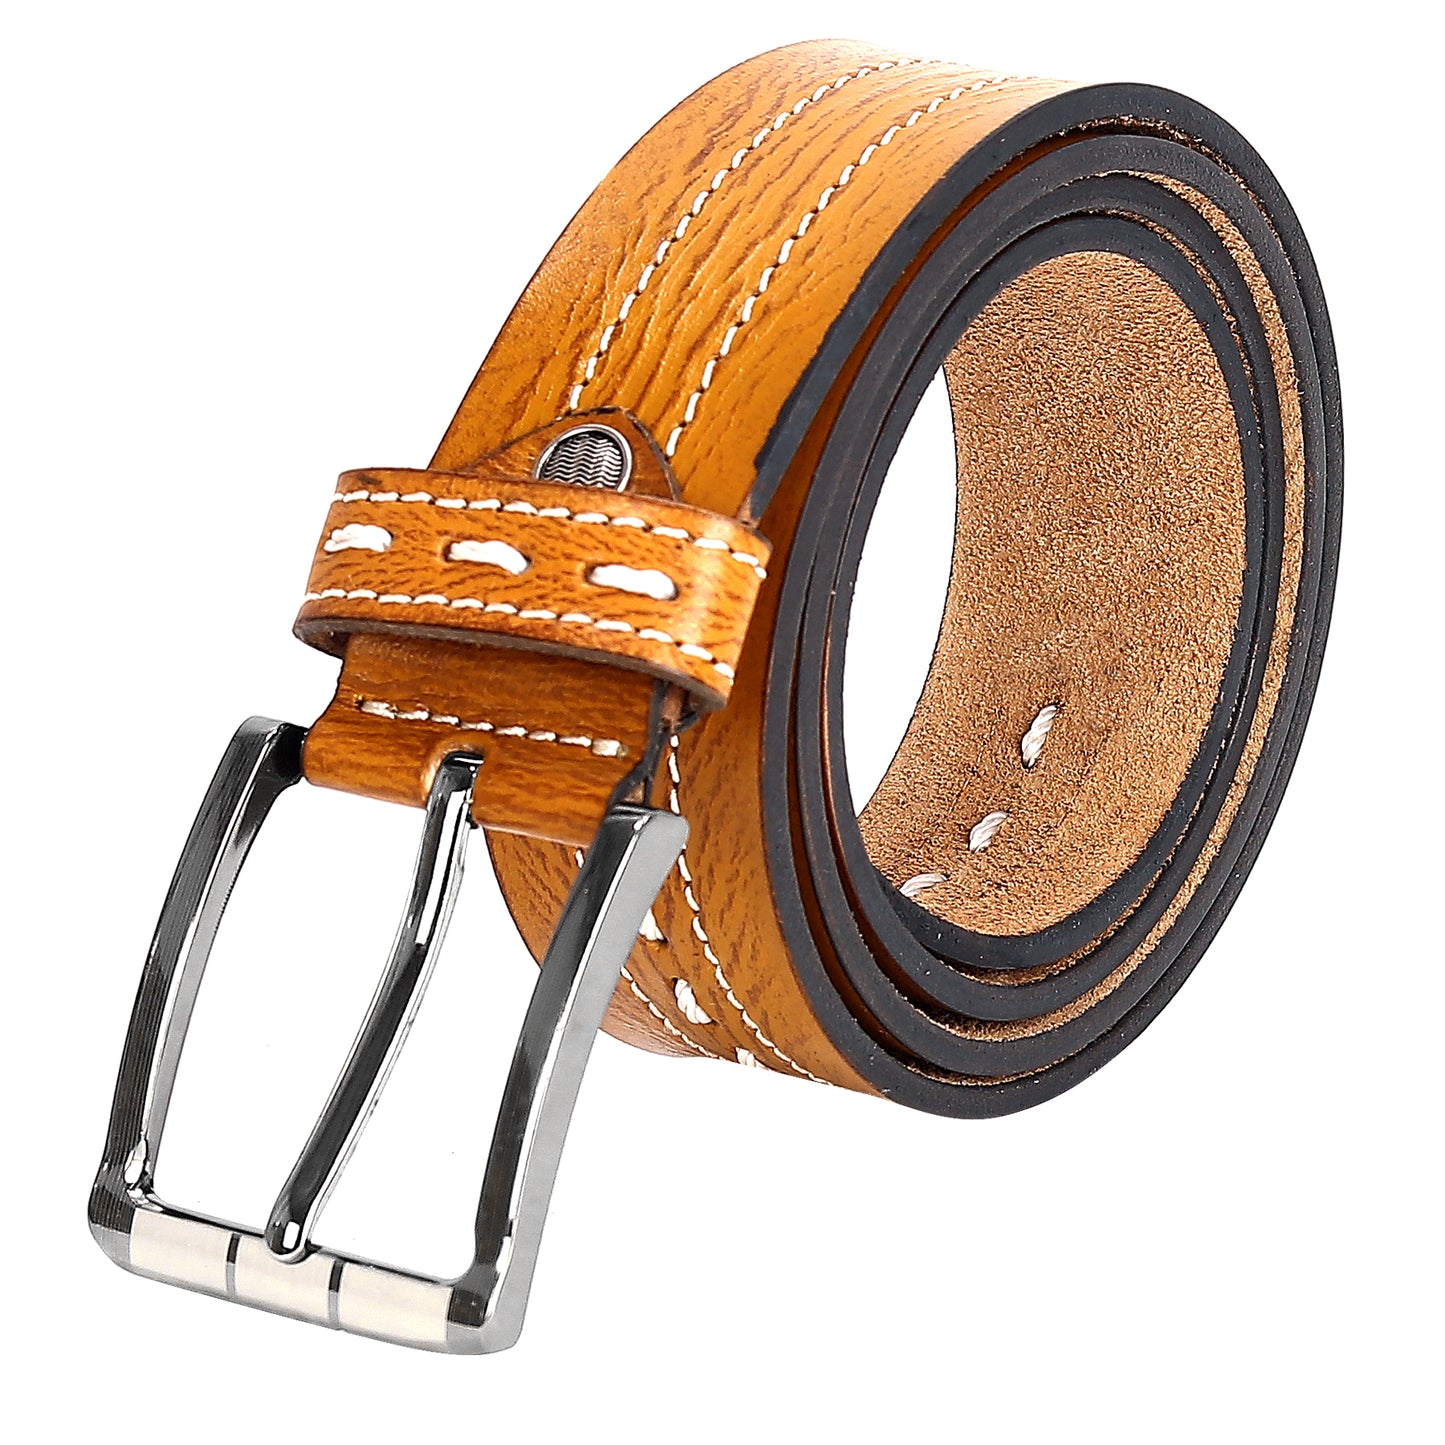 Leather World Formal Casual Tan Color Branded Stylish Genuine Leather Belts For Men